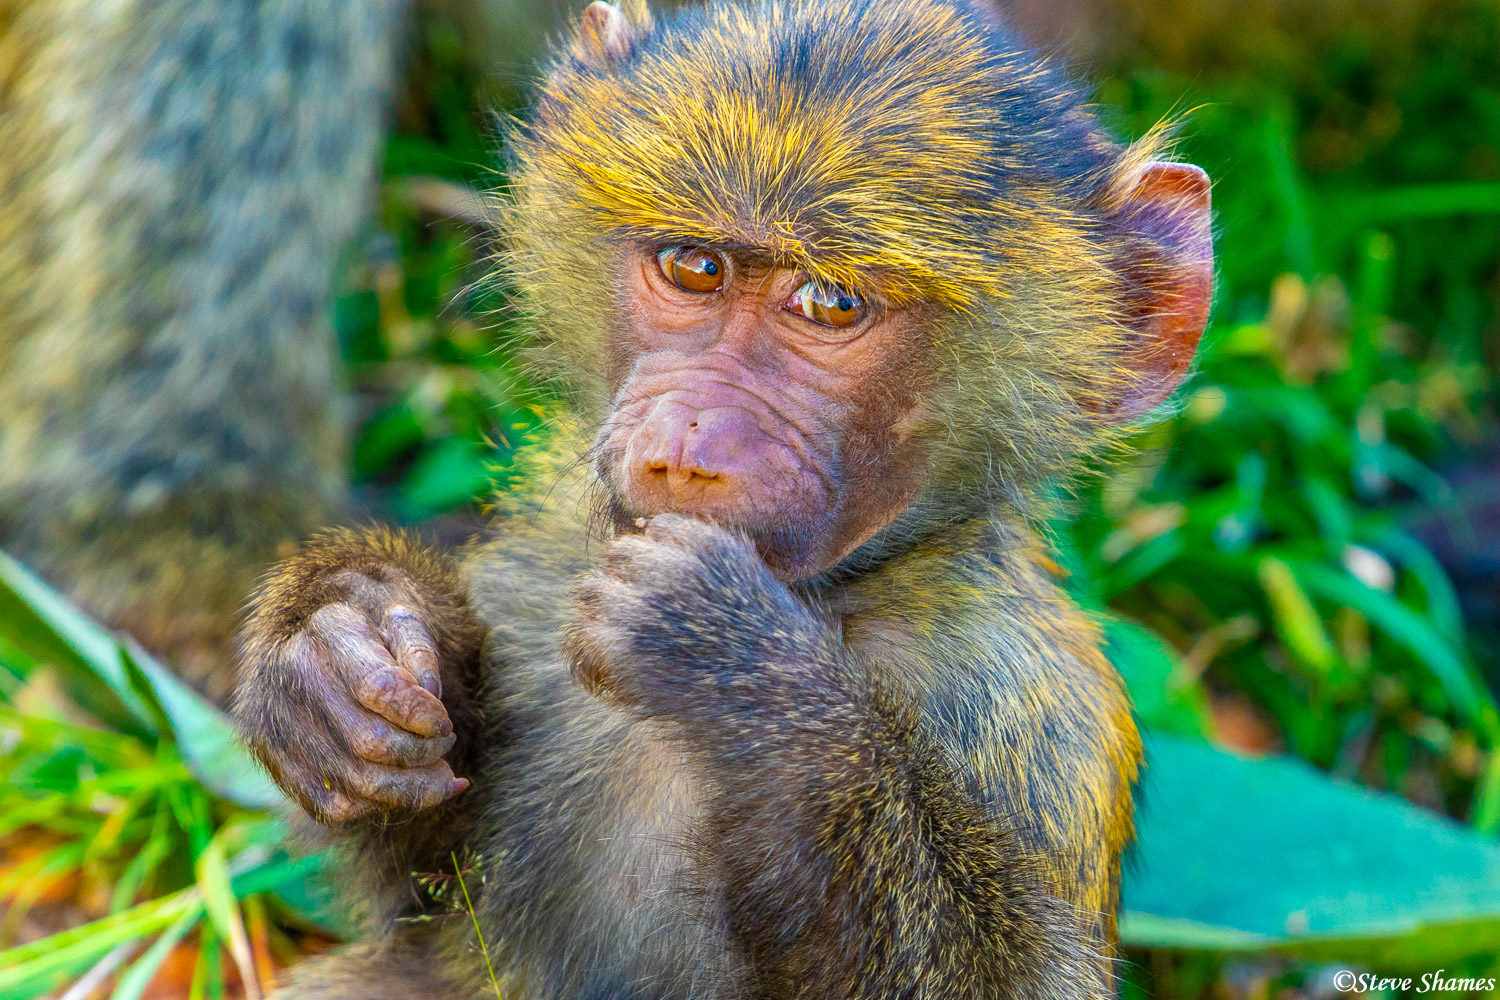 Portrait of a baby baboon. This one has a lot of yellow hair.